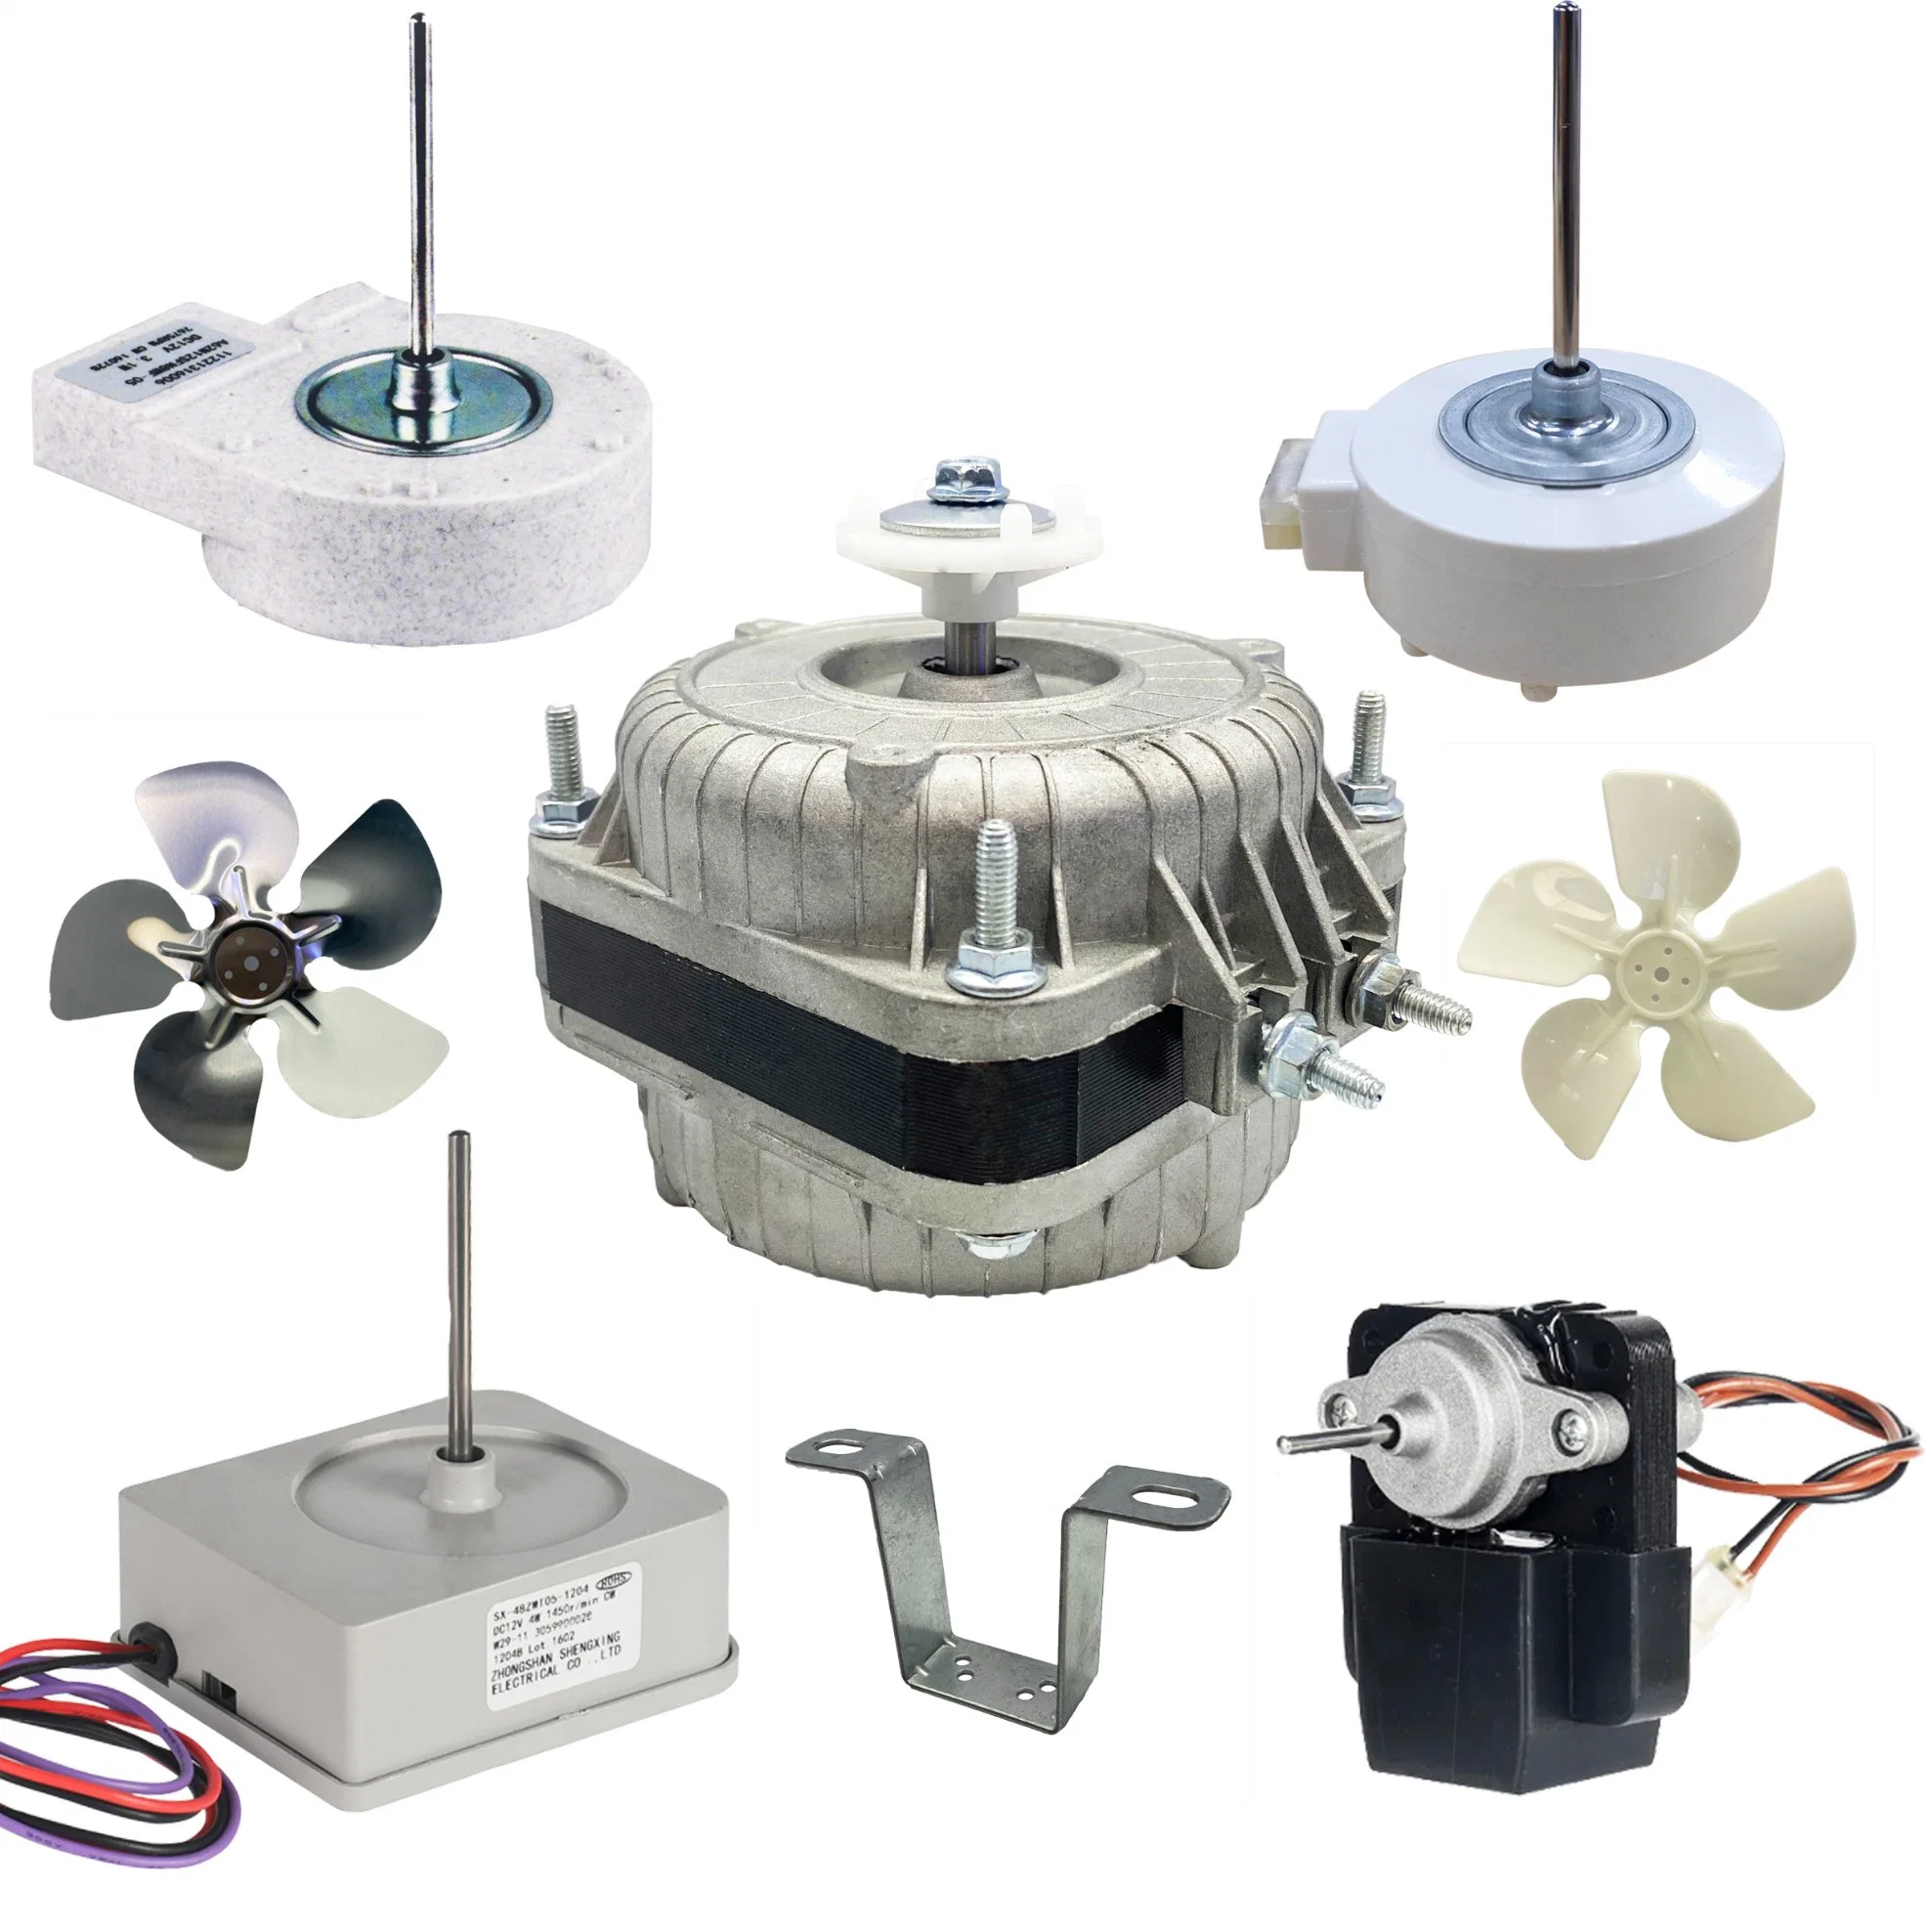 Ruijeep New Product 3 Years Warranty Electric High Quality Durable and Low Noise DC 3.3W Refrigerator Fan Motor